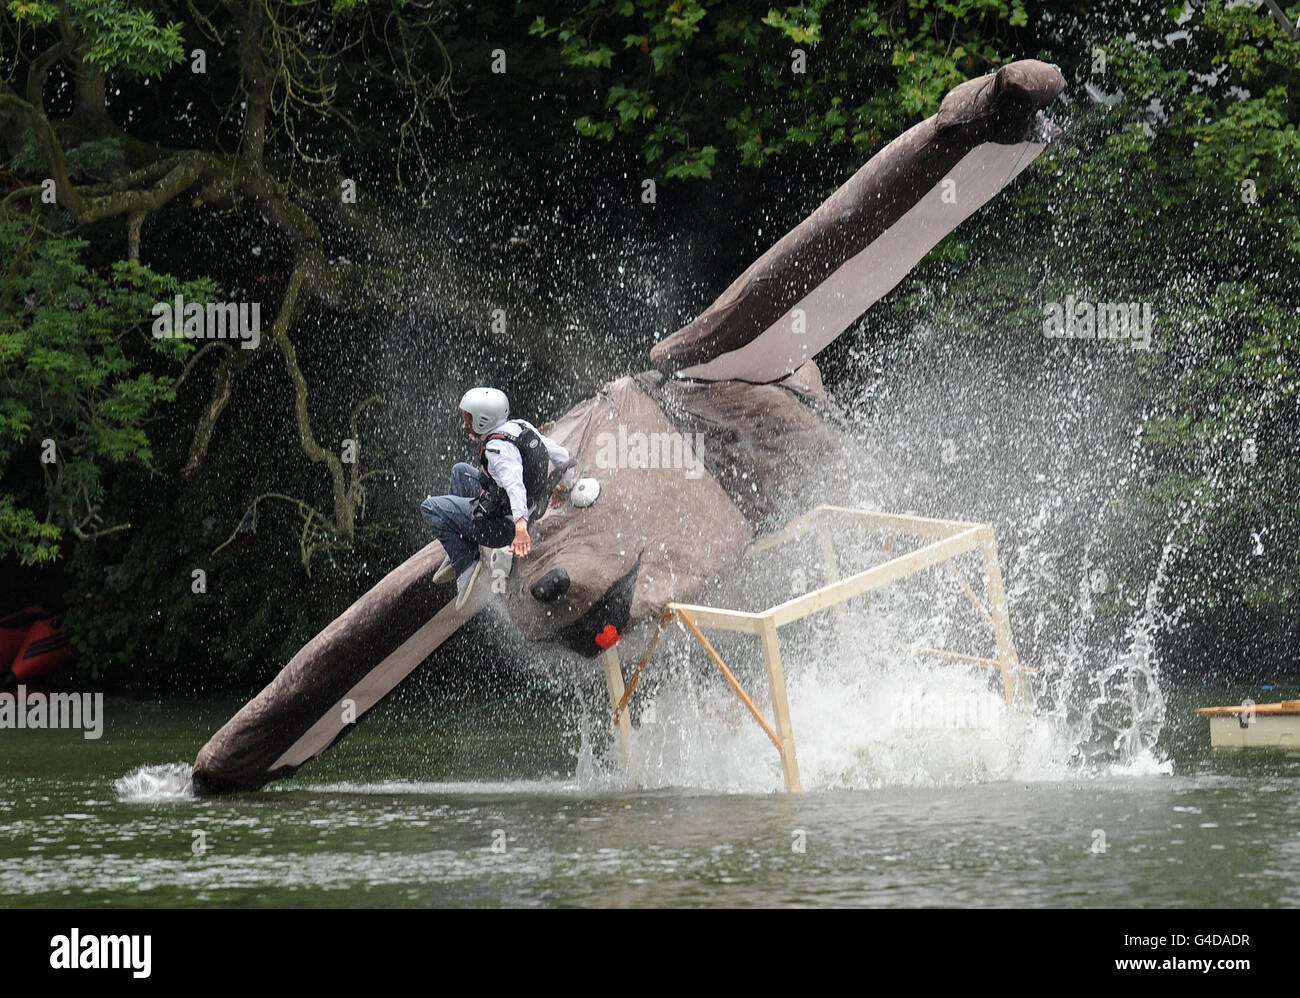 Where Weasels Dare crashes into the water during the Red Bull Flugtag event in Roundhay Park, Leeds. Stock Photo